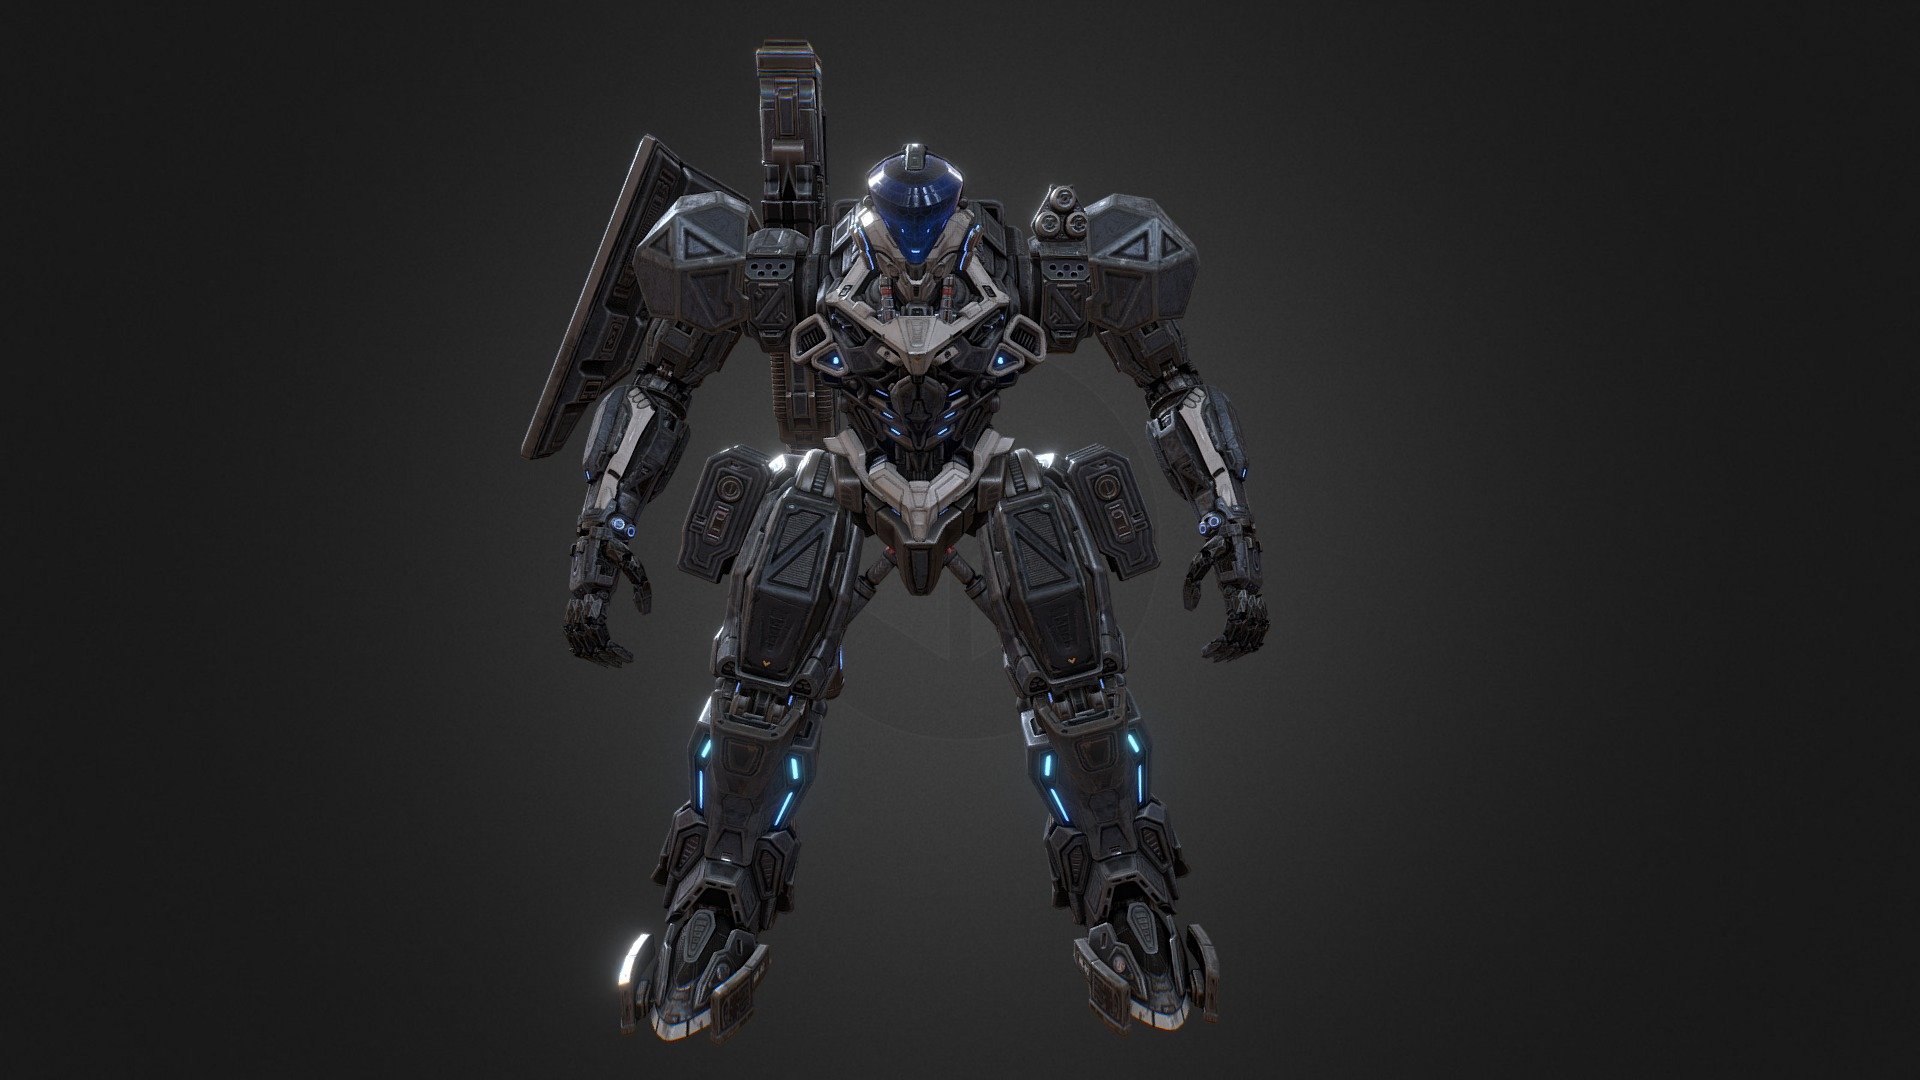 The first operational highly articulated, neuro-enhanced, Mechanized Combat Unit, &ldquo;Archangel